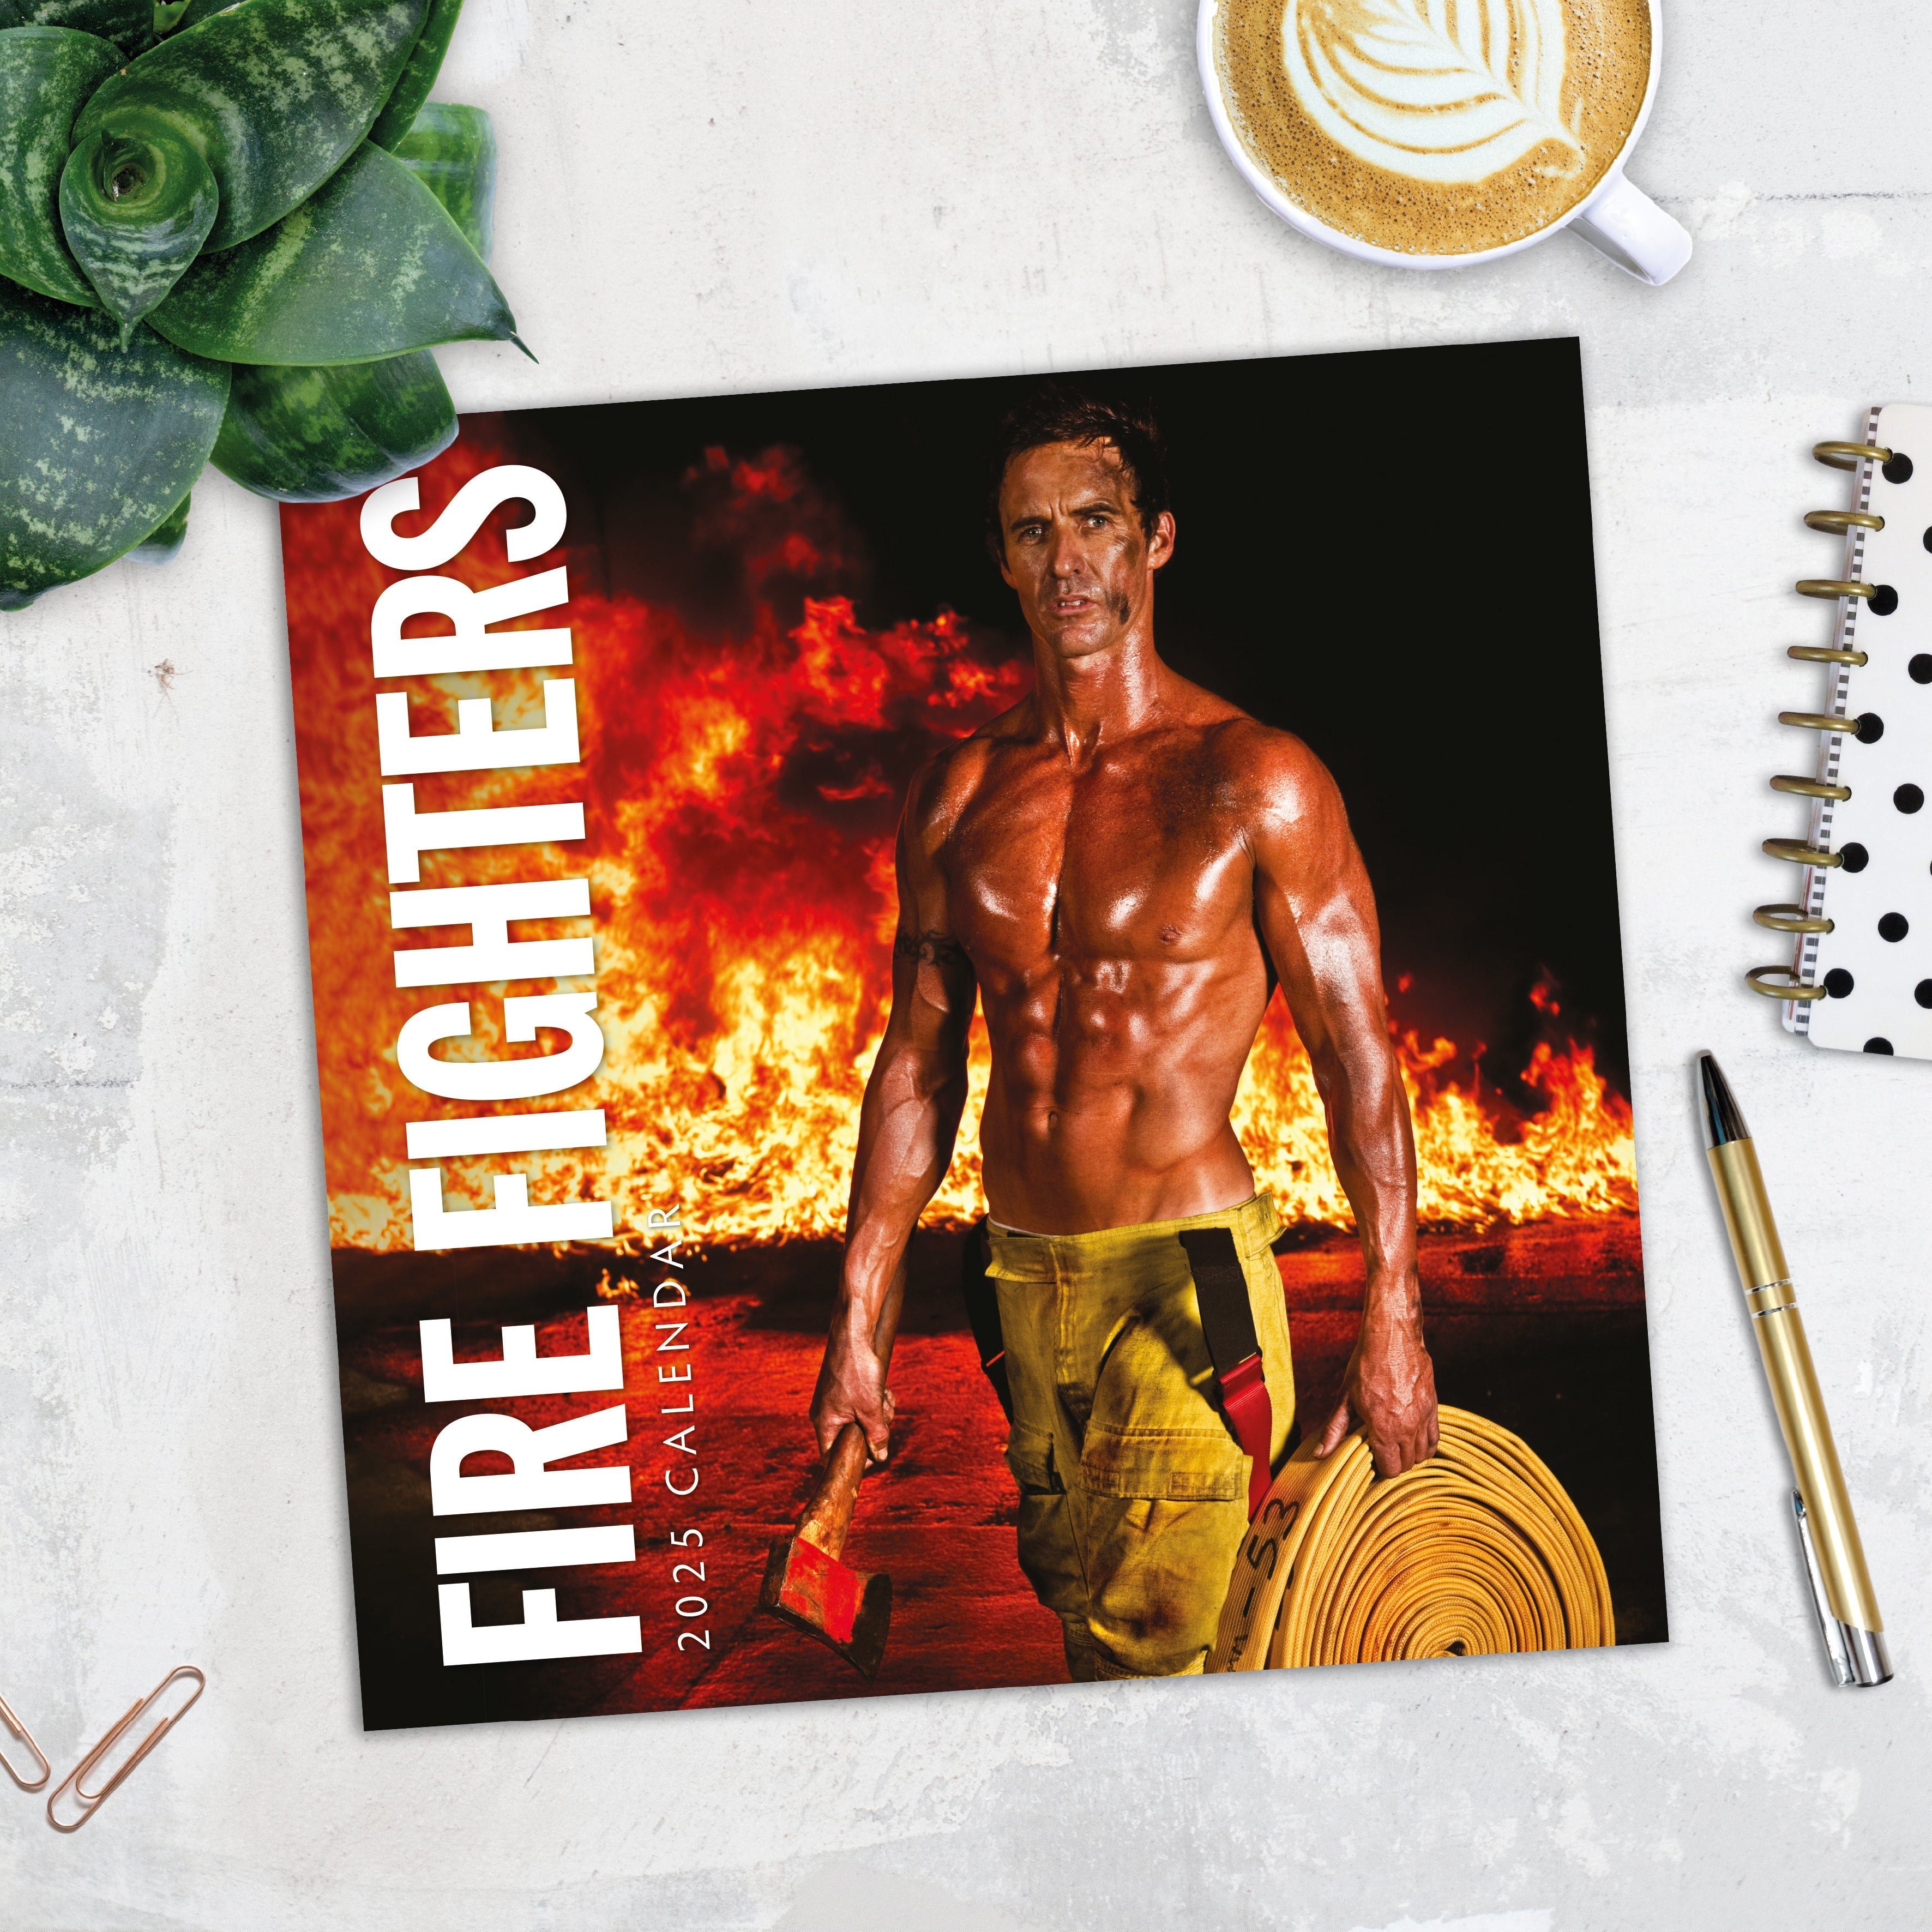 2025 Fire Fighters - Square Wall Calendar